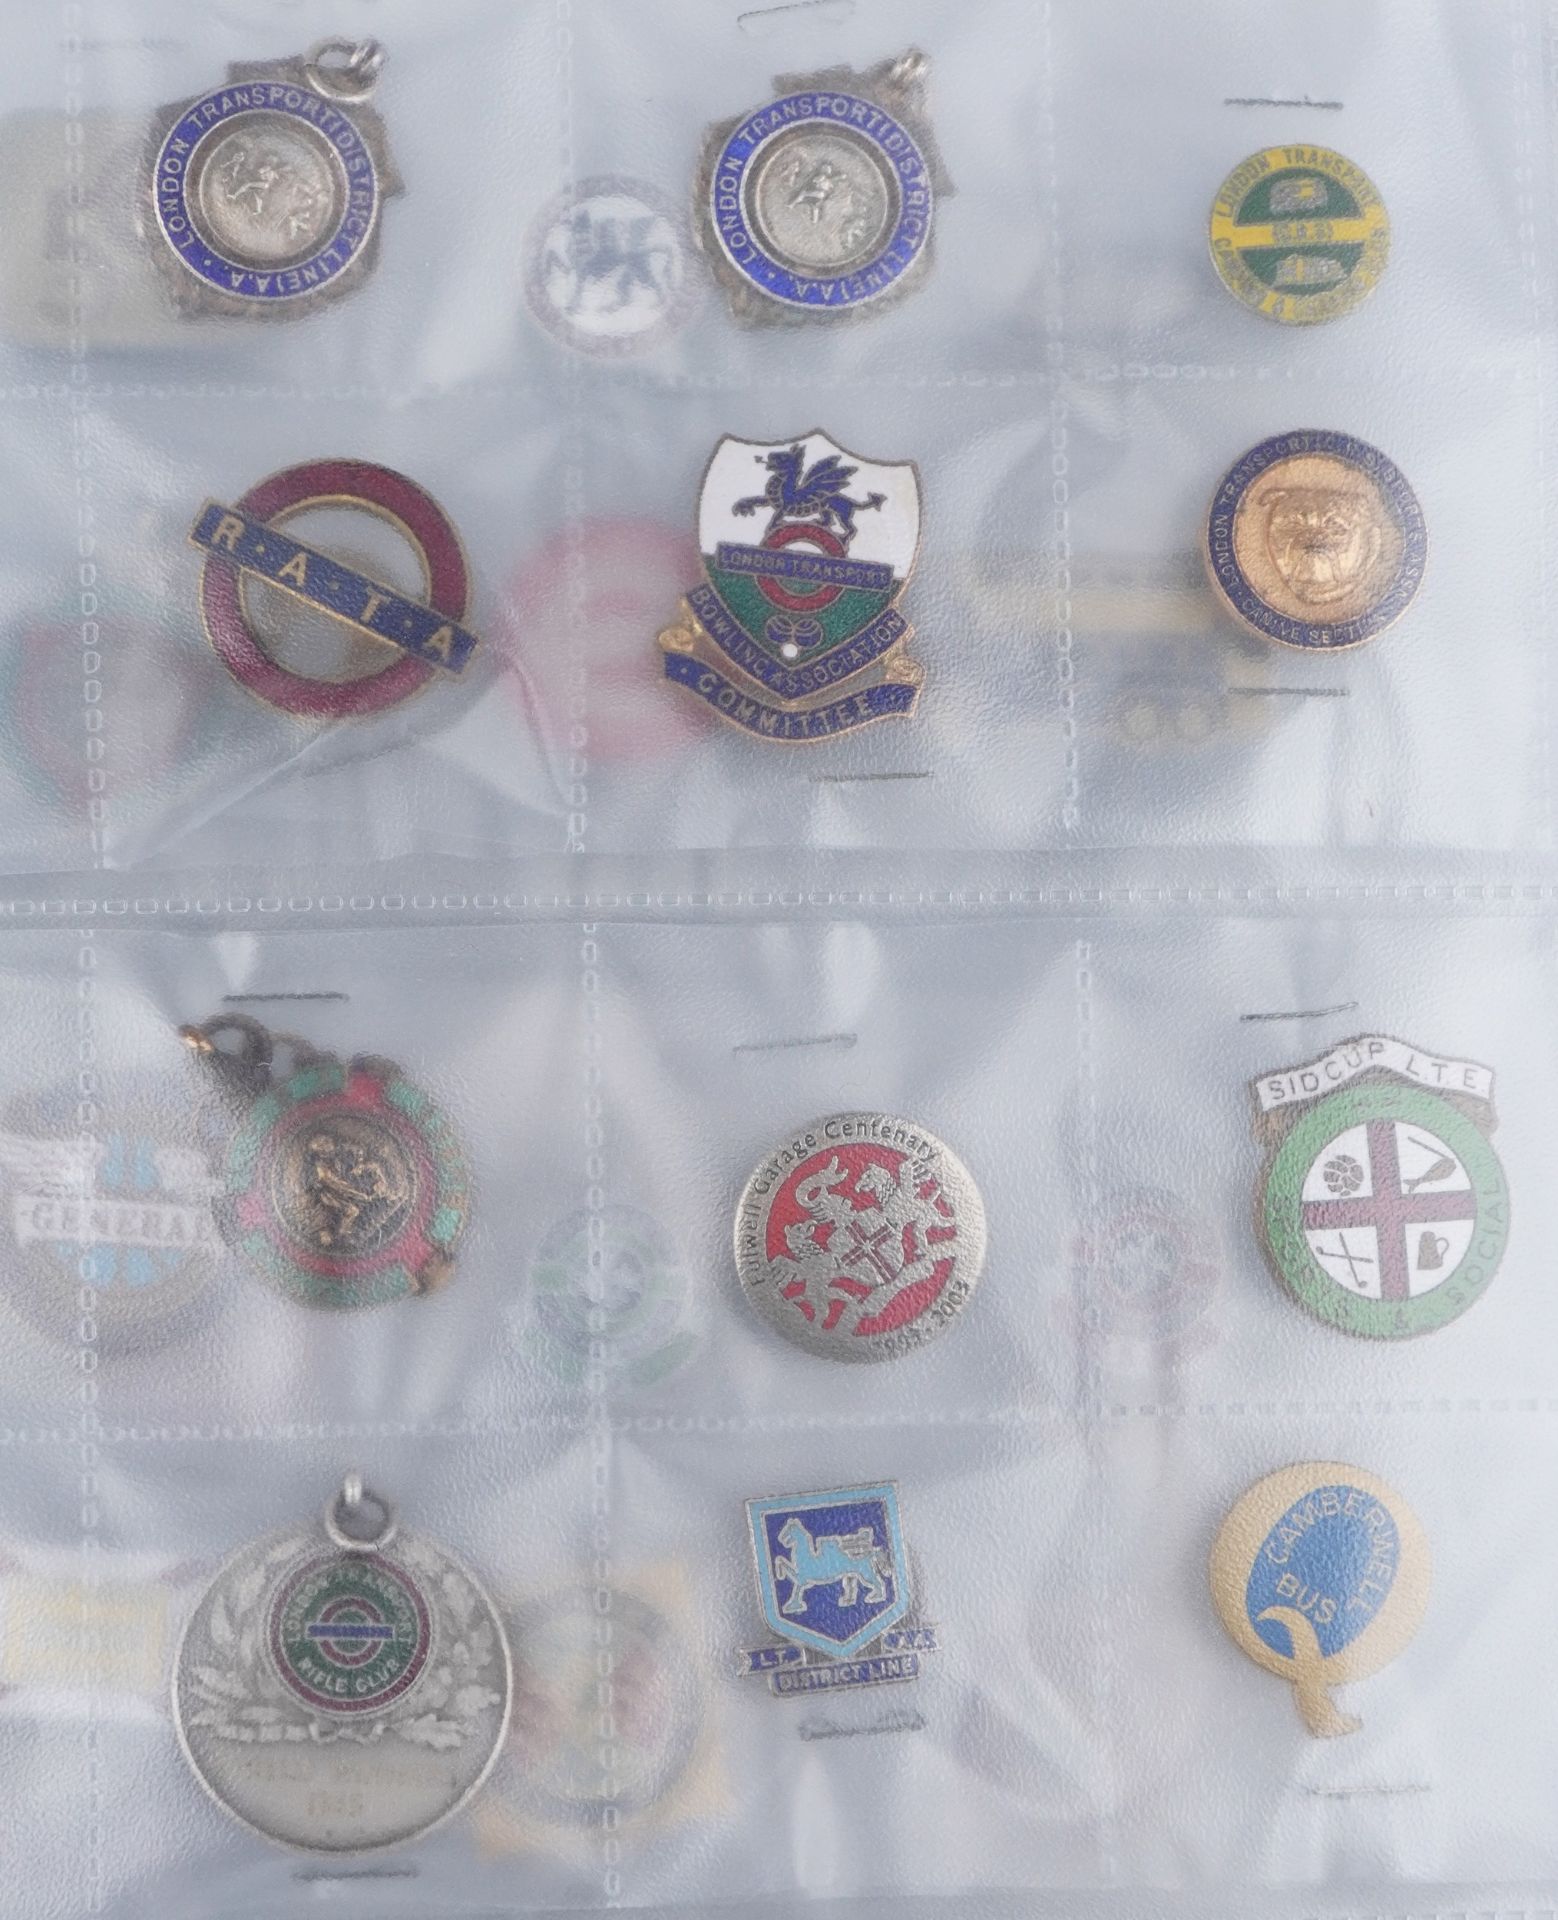 Large collection of automobilia and sporting interest badges and jewels, some arranged in an album - Image 10 of 14